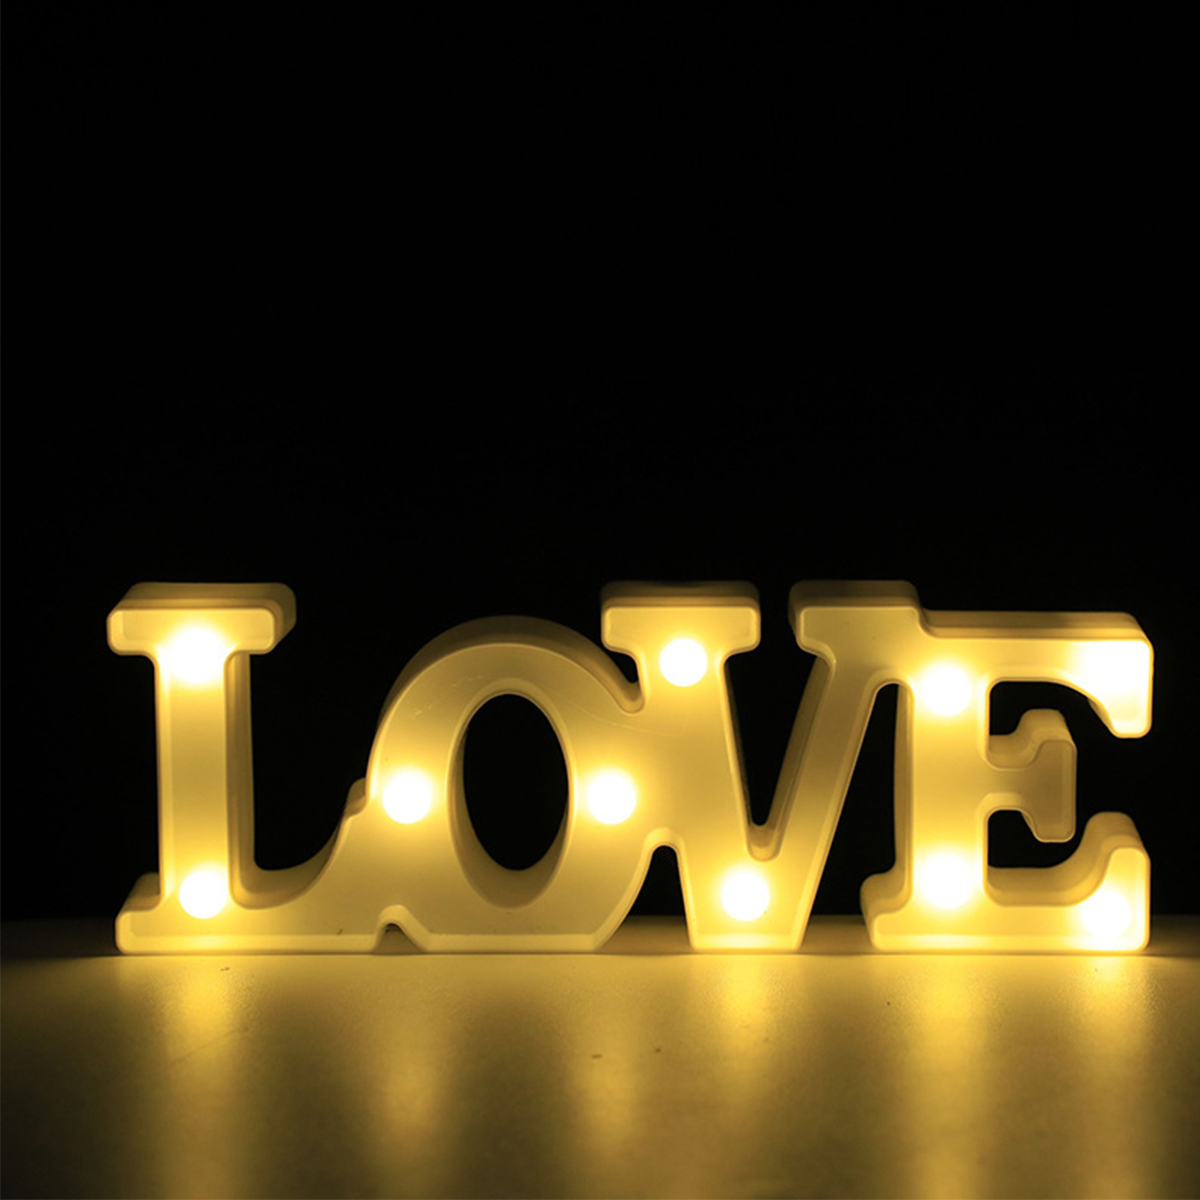 Love Sign Valentines Day Light Decorations Light up LED Letter Lights Sign Light Up Letters Sign for Night Light Wedding/Birthday Party - image 1 of 7